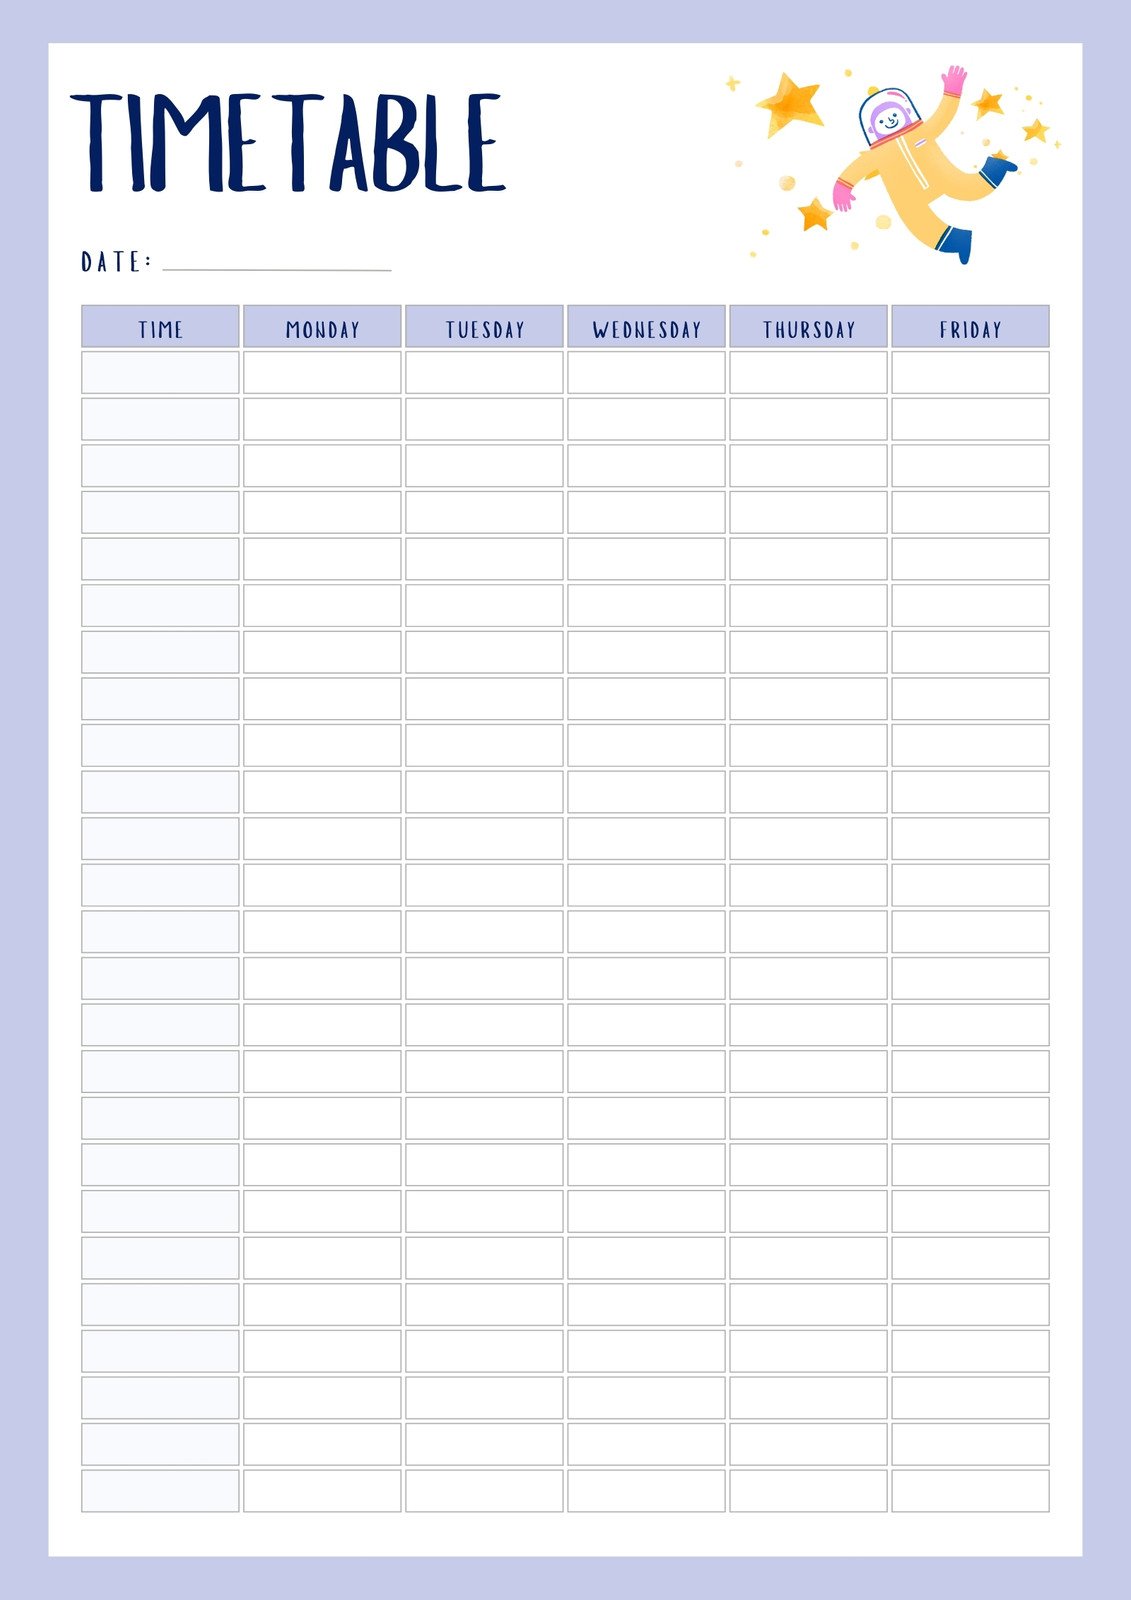 Back to School Timetable Planner in Purple White Minimal Style